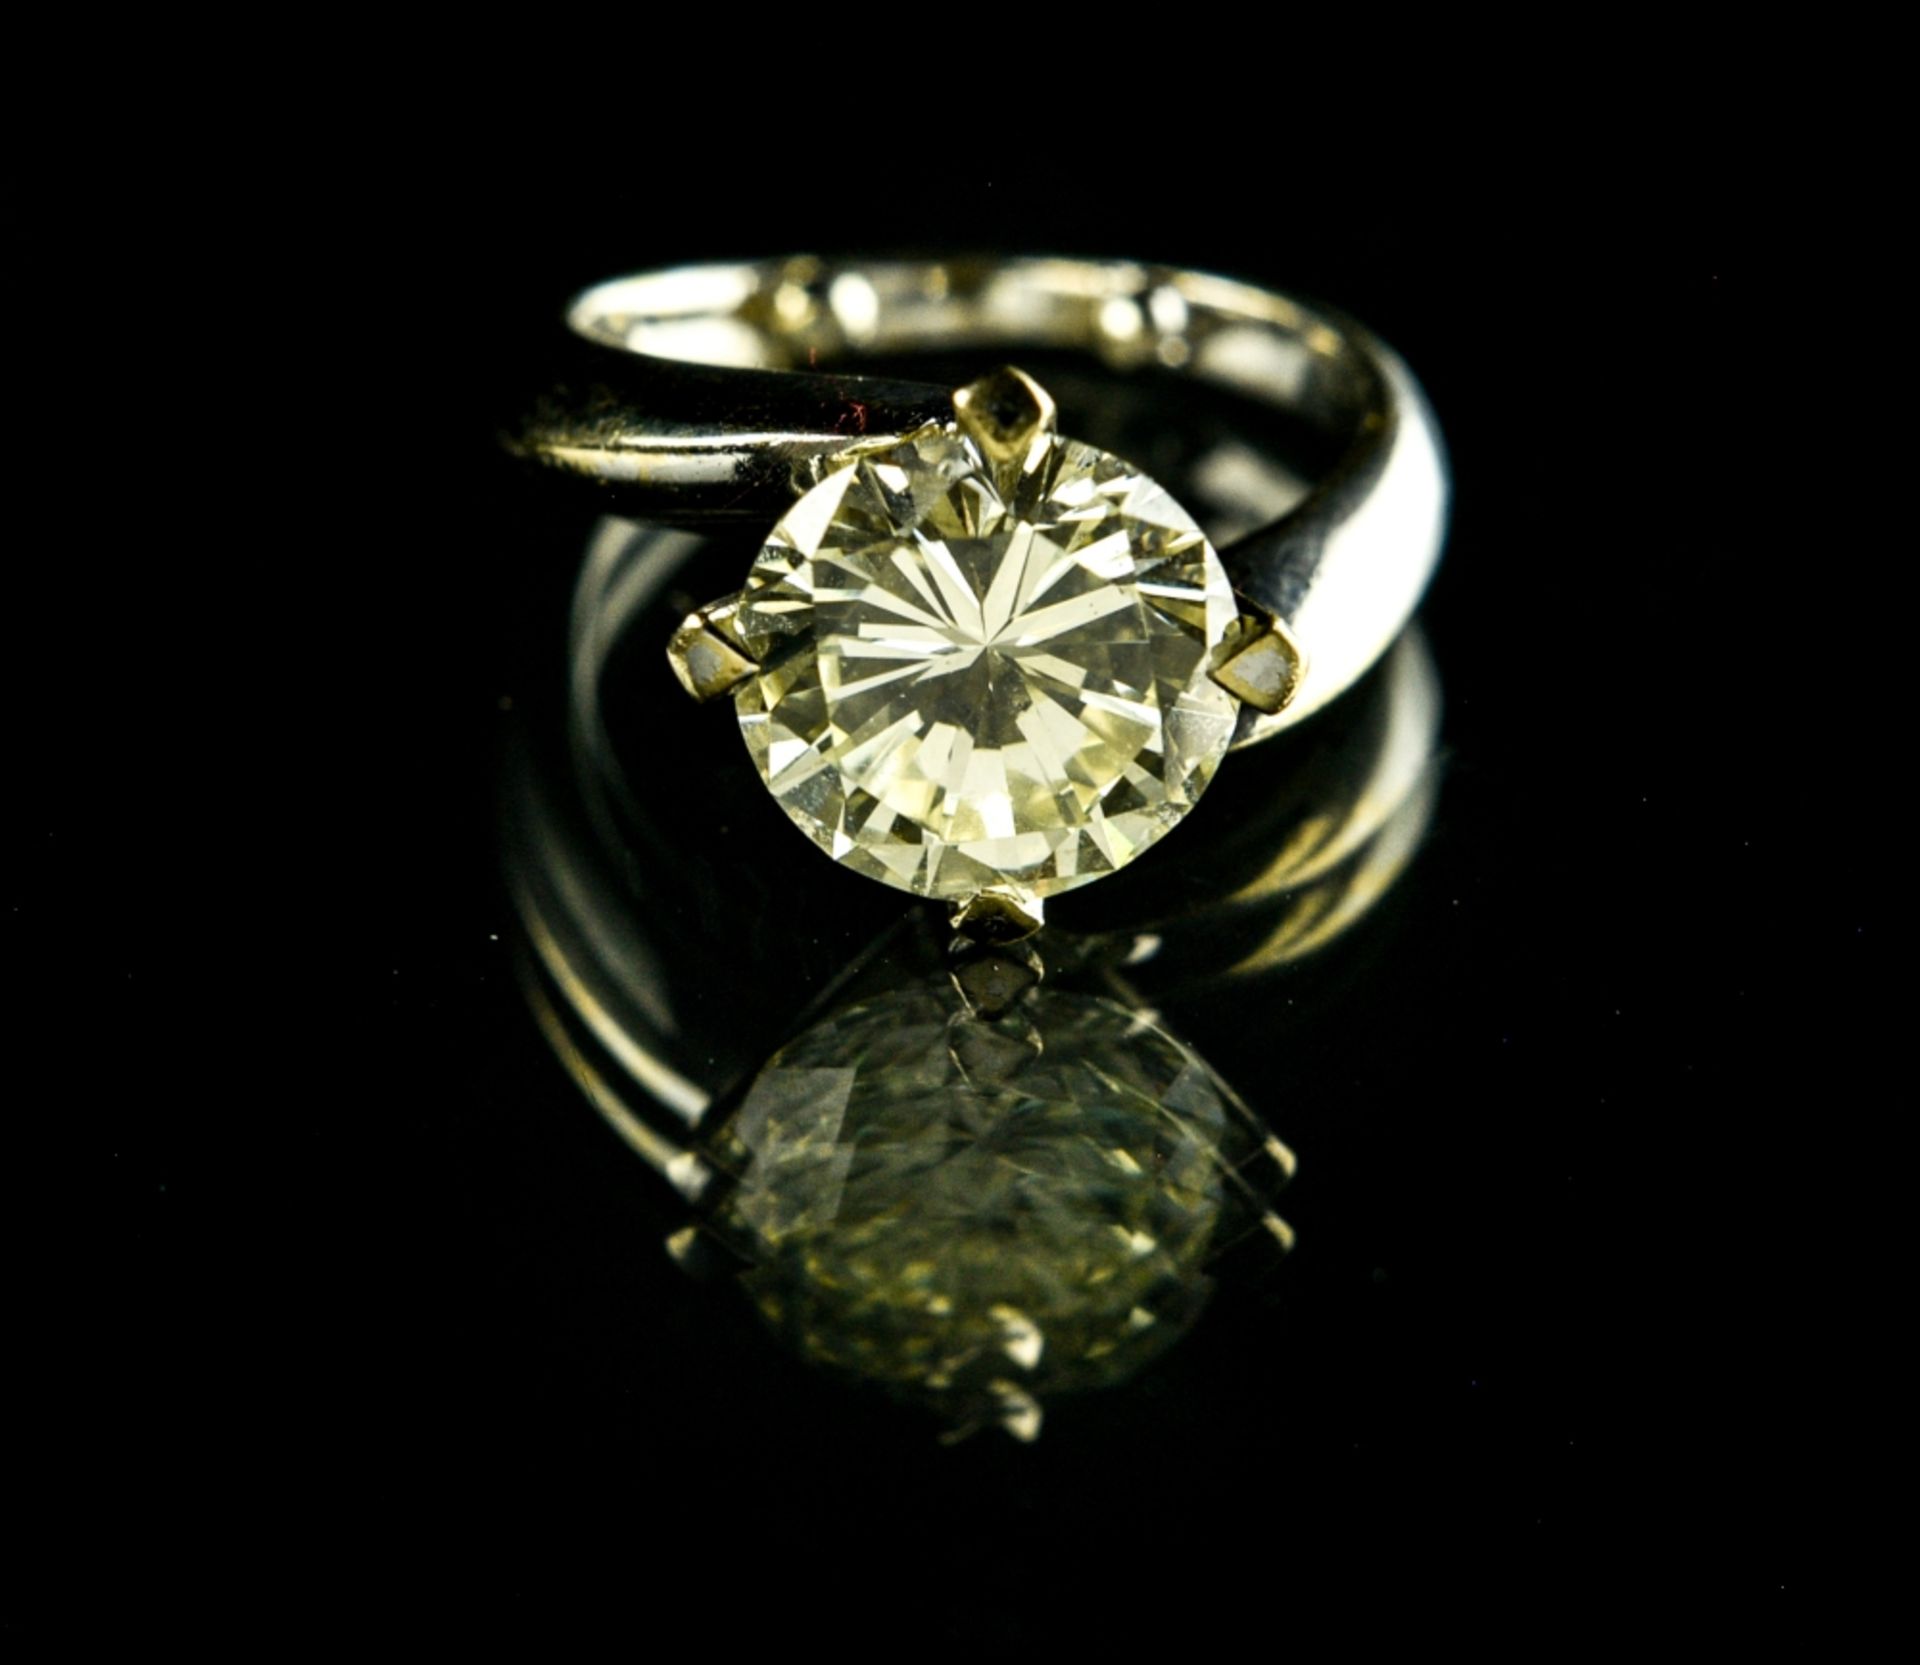 Solitaire ring 18 kt white gold, set with a yellow brilliant-cut diamond weighing approx. 4 ct, - Image 2 of 2